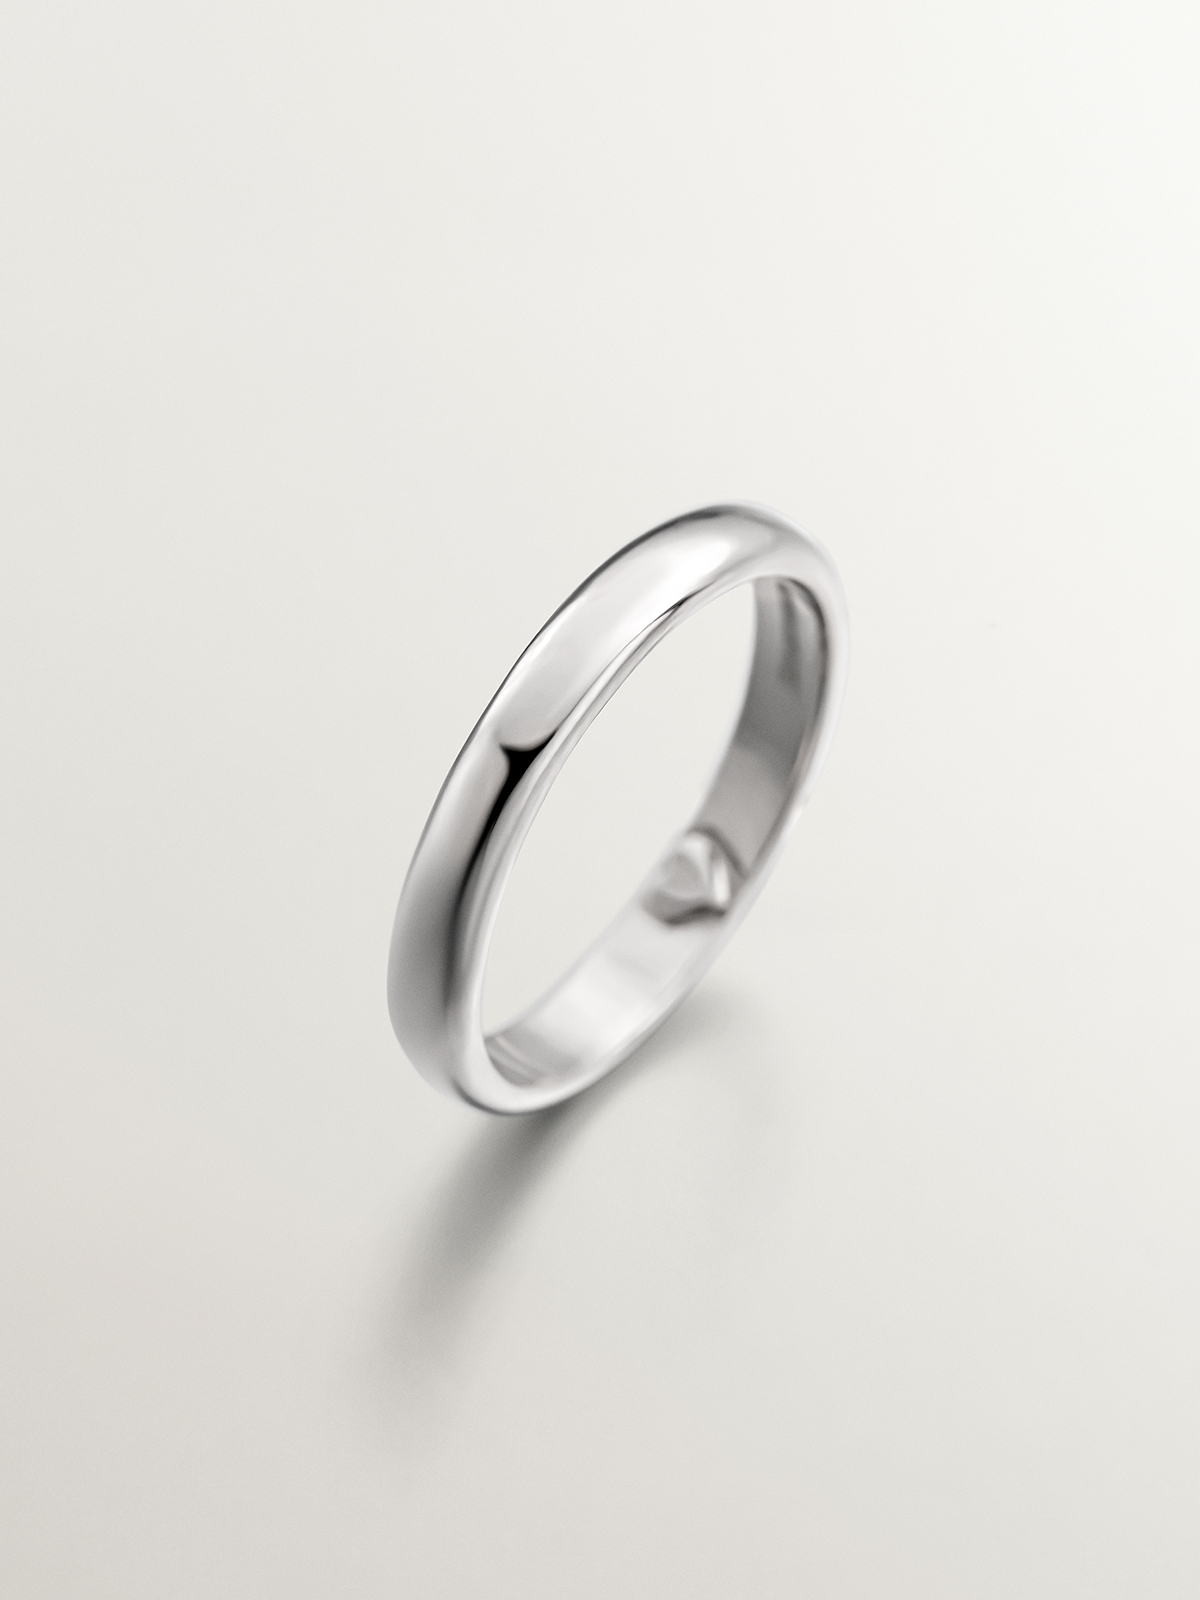 925 Silver band ring with an interior heart.